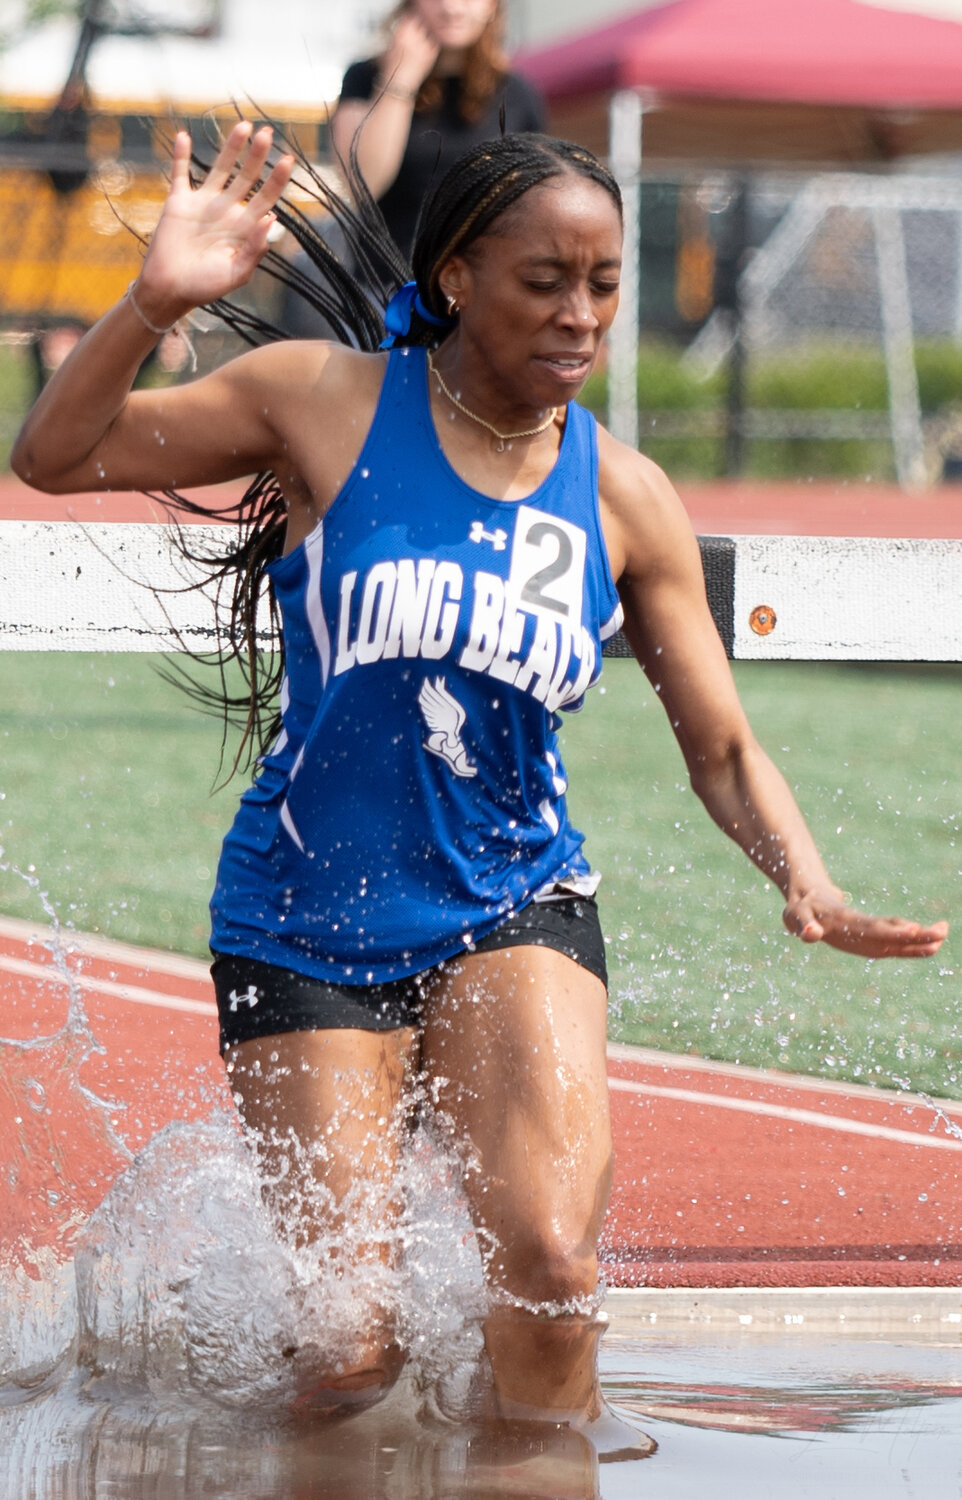 Senior co-captain Jewel Jones had a notable spring for the Marines and finished second in Nassau Class AAA in the 2000 steeplechase.